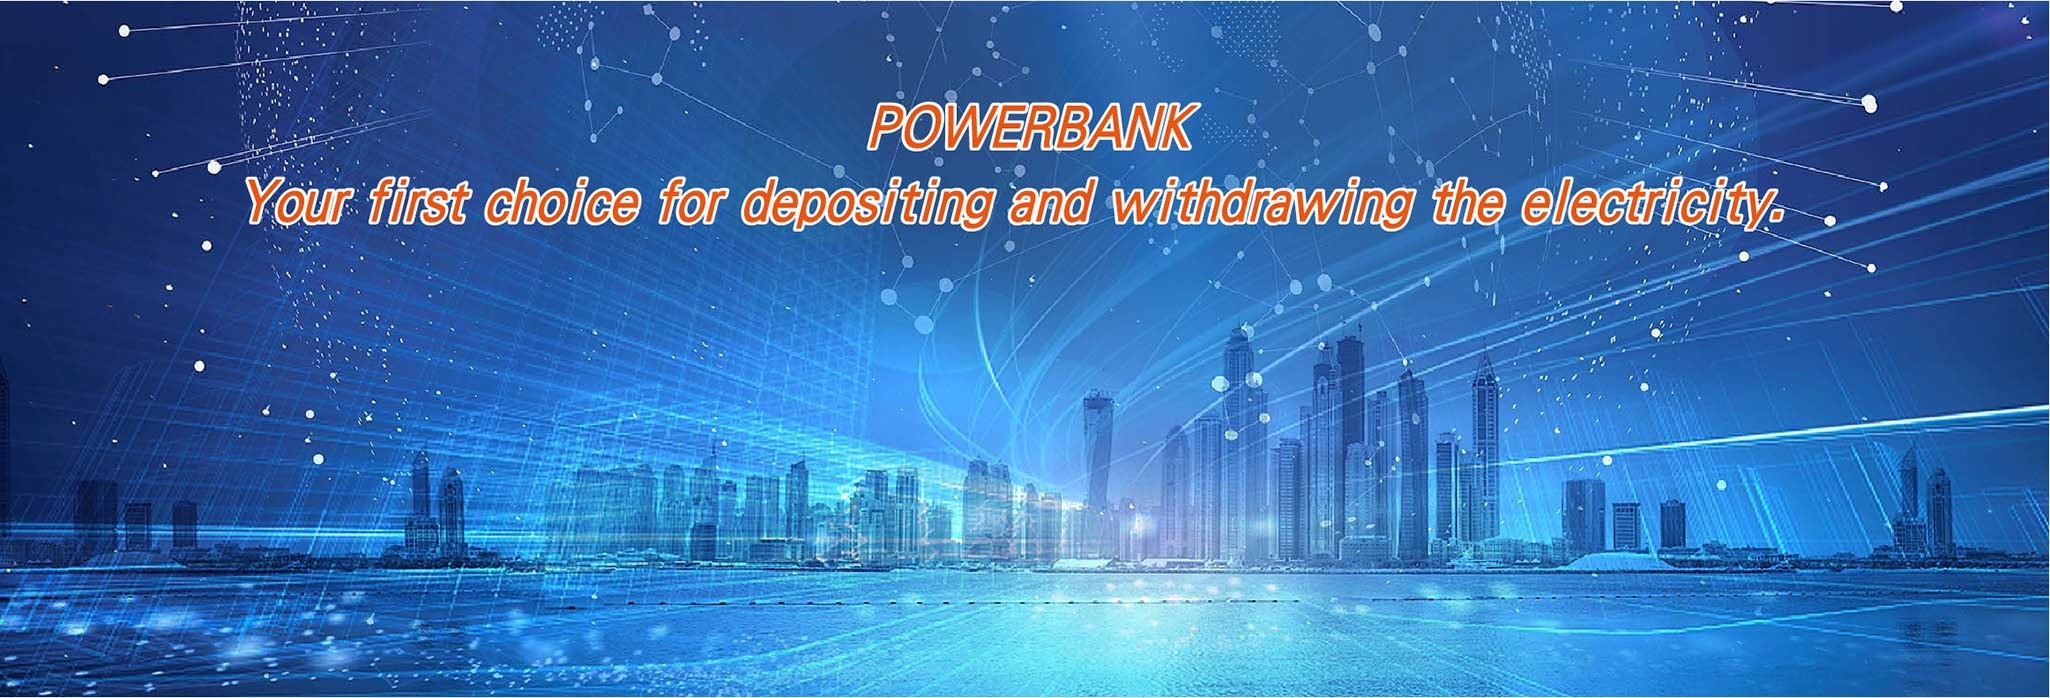 POWERBANK - Your first choice for depositing and withdrawing the electricity